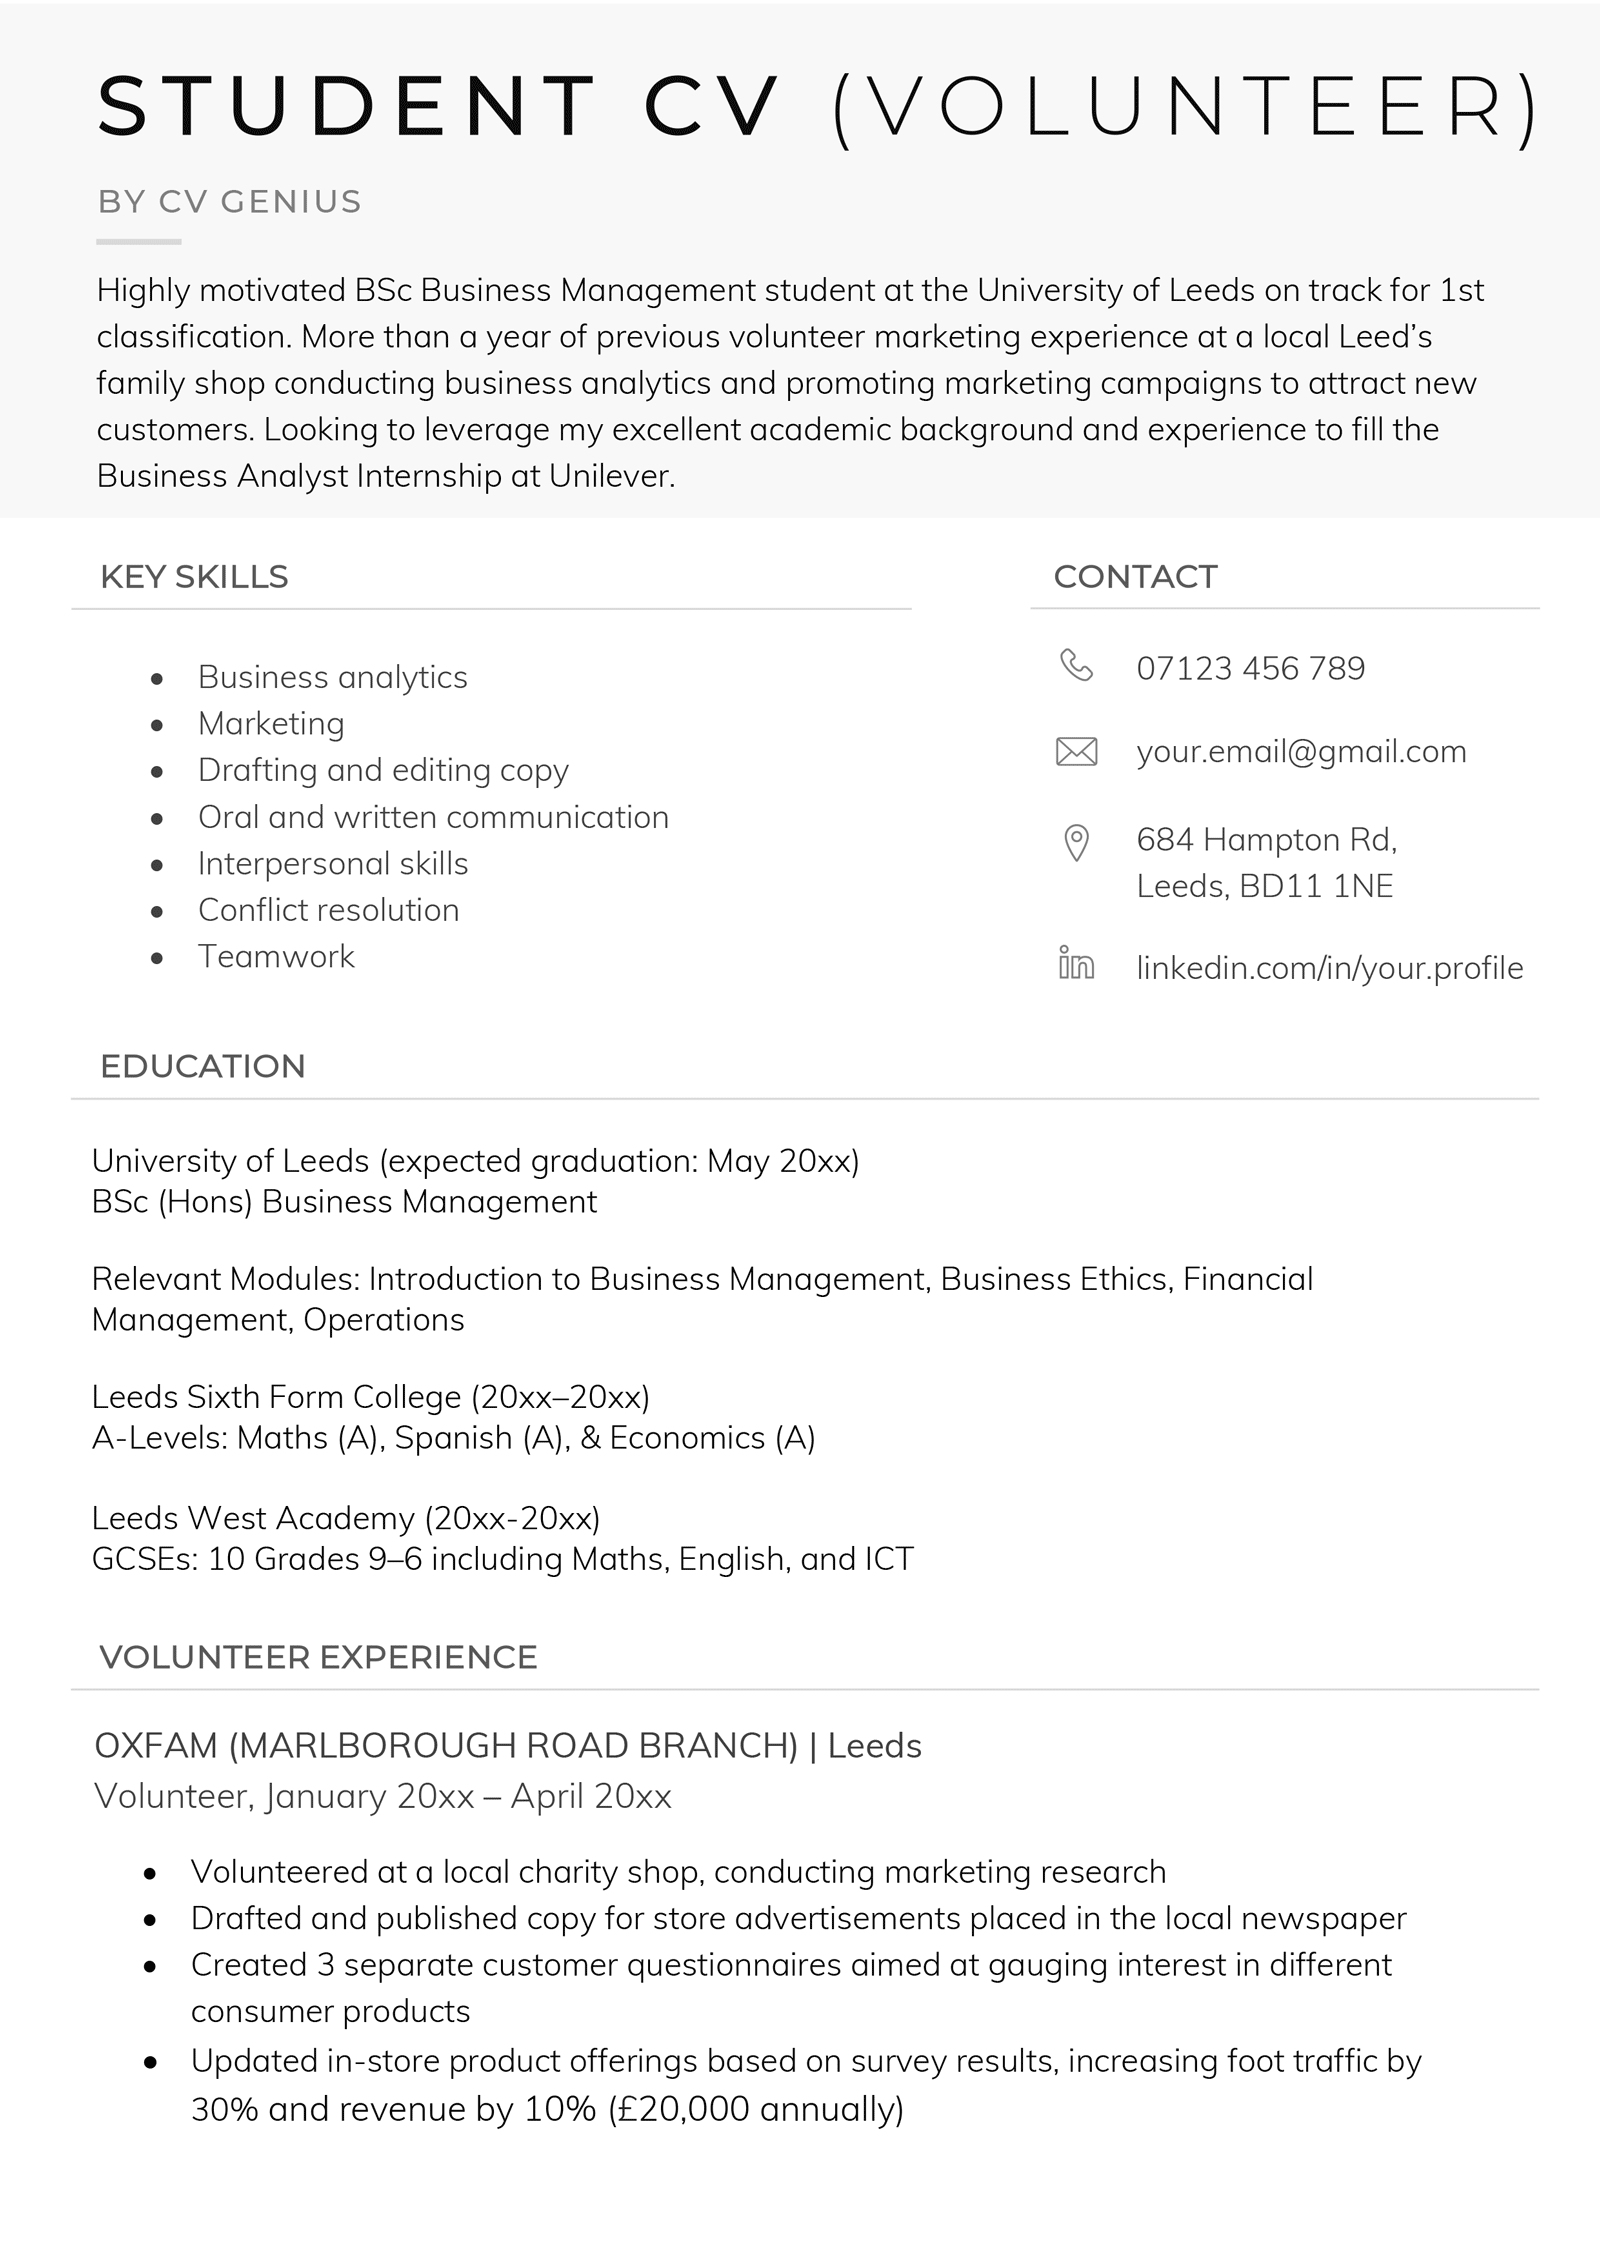 An example of a university student CV with no work experience listed